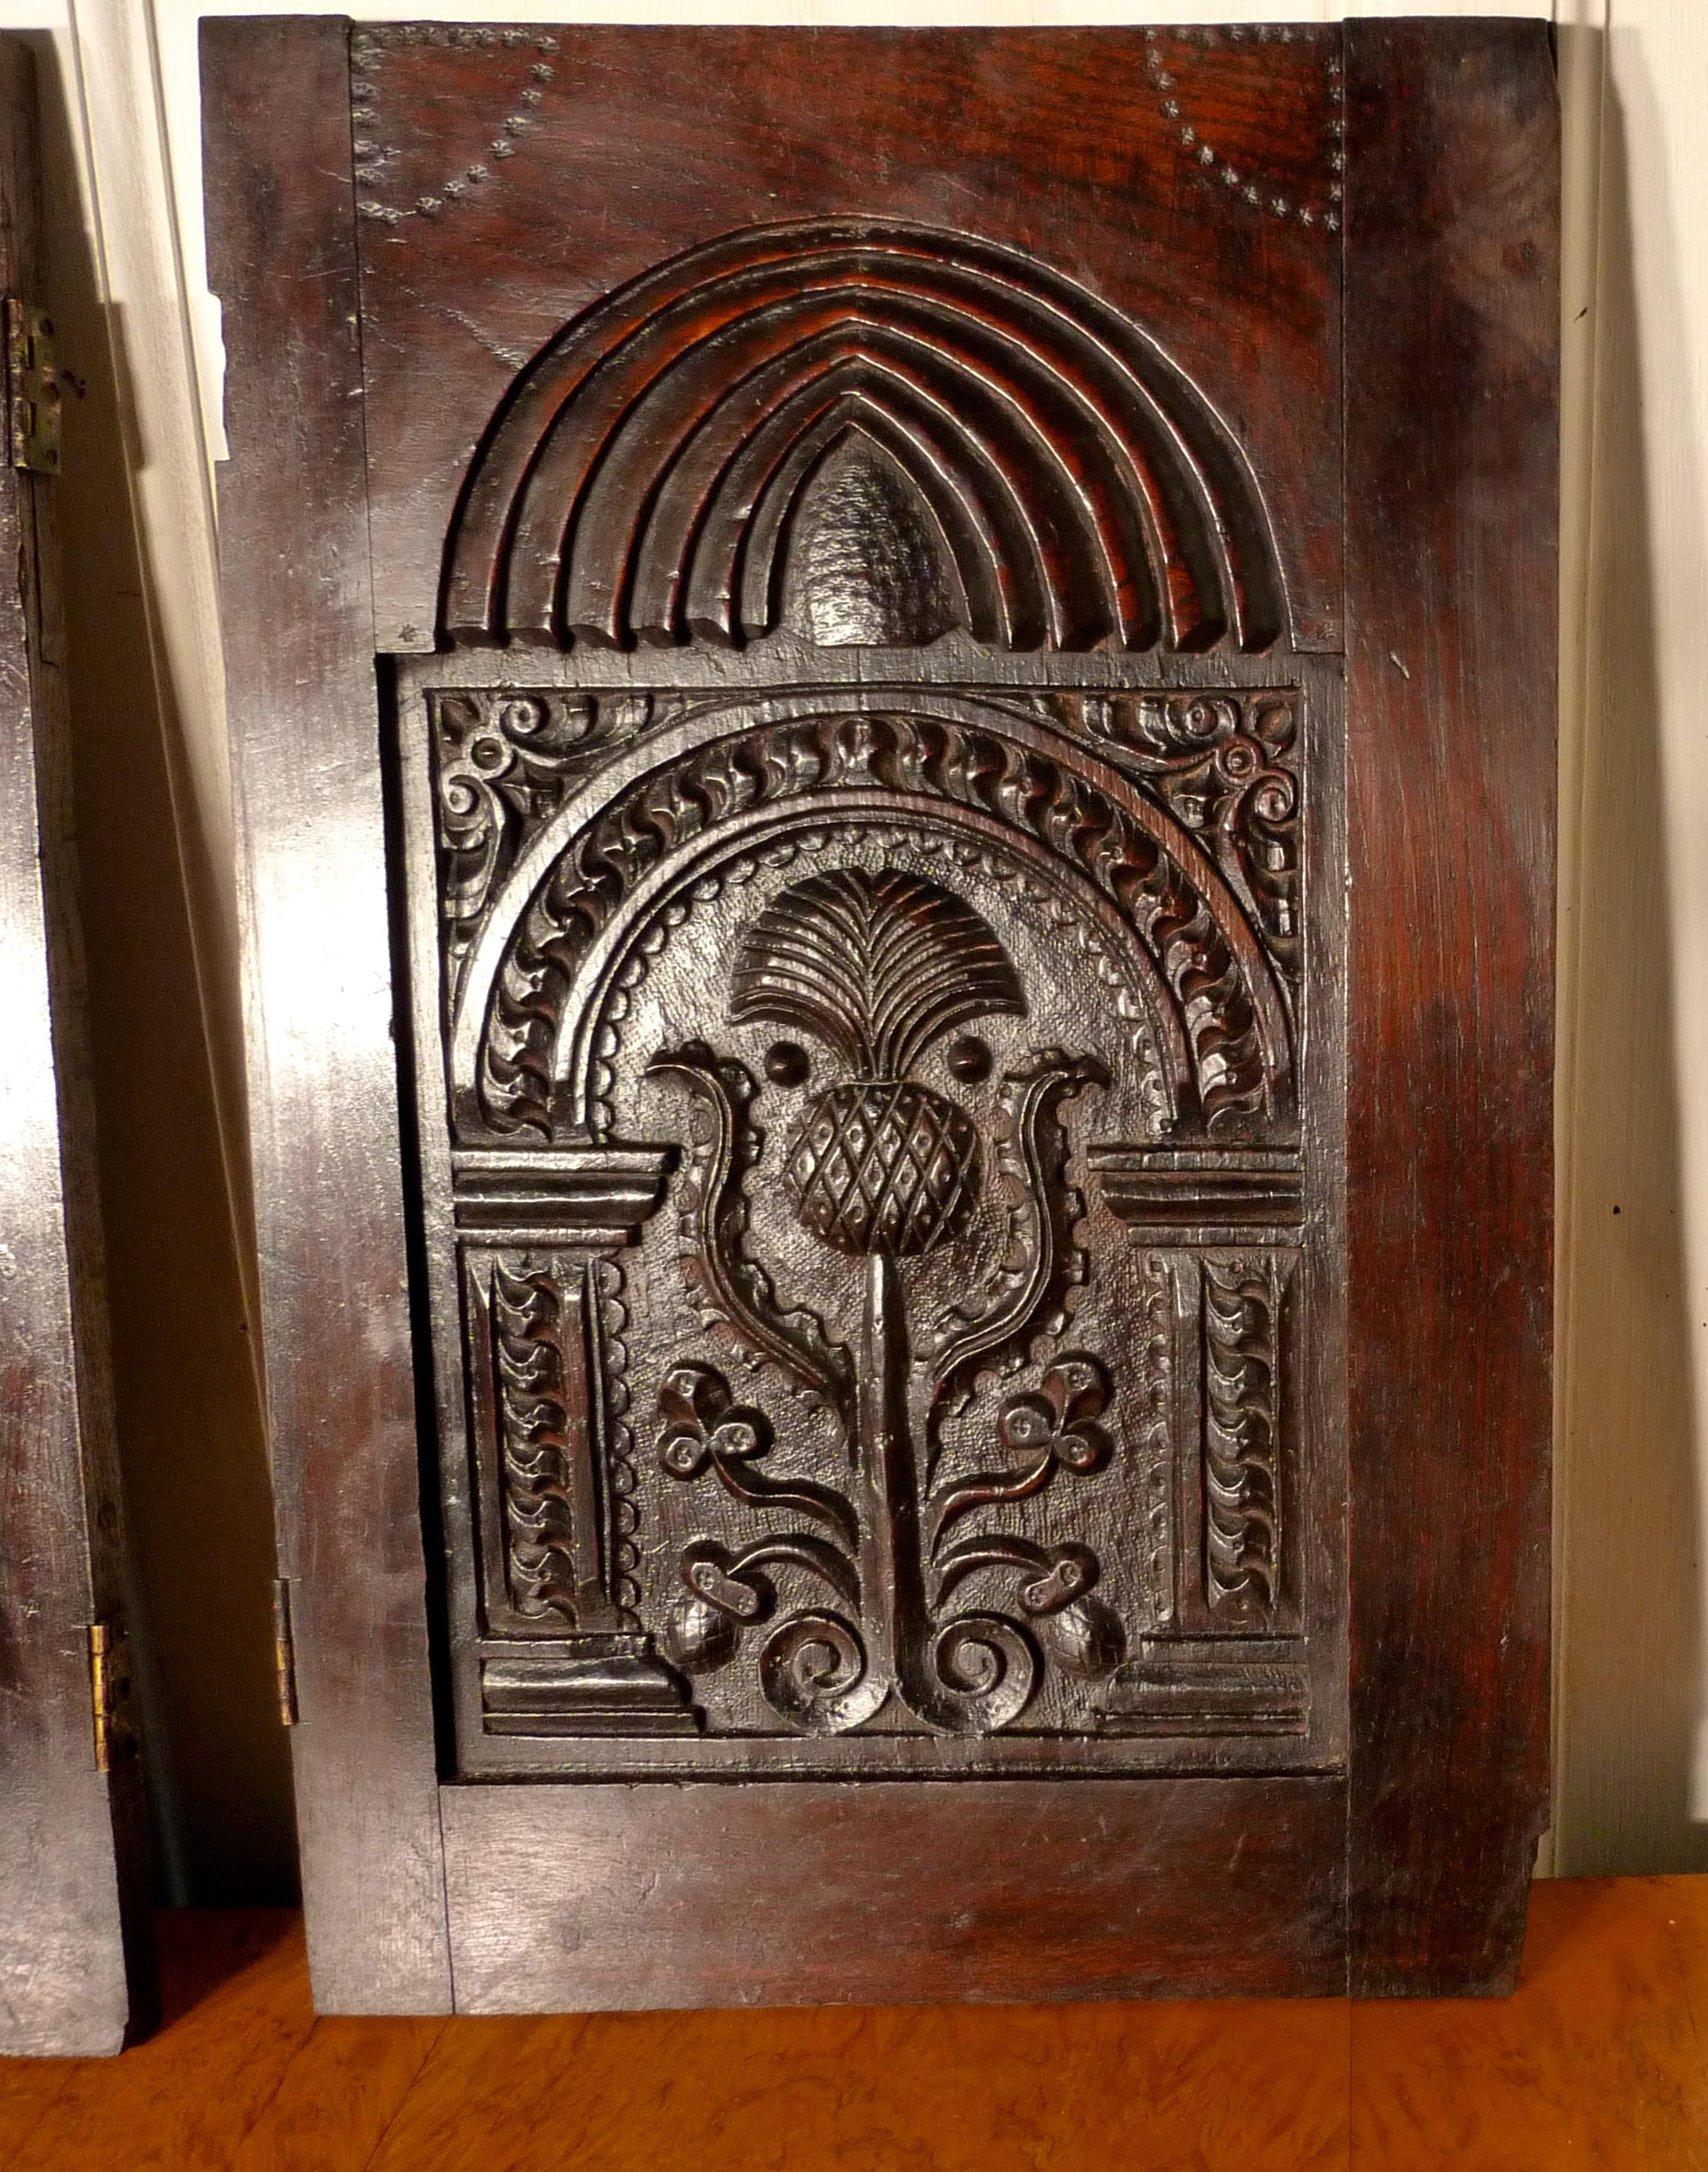 A pair of superbly carved oak door panels

These carved panels are the doors from a 19th century oak cupboard, probably of French origin. 
The carved panels on the door represent the tree of life with mythical serpent like creatures growing from